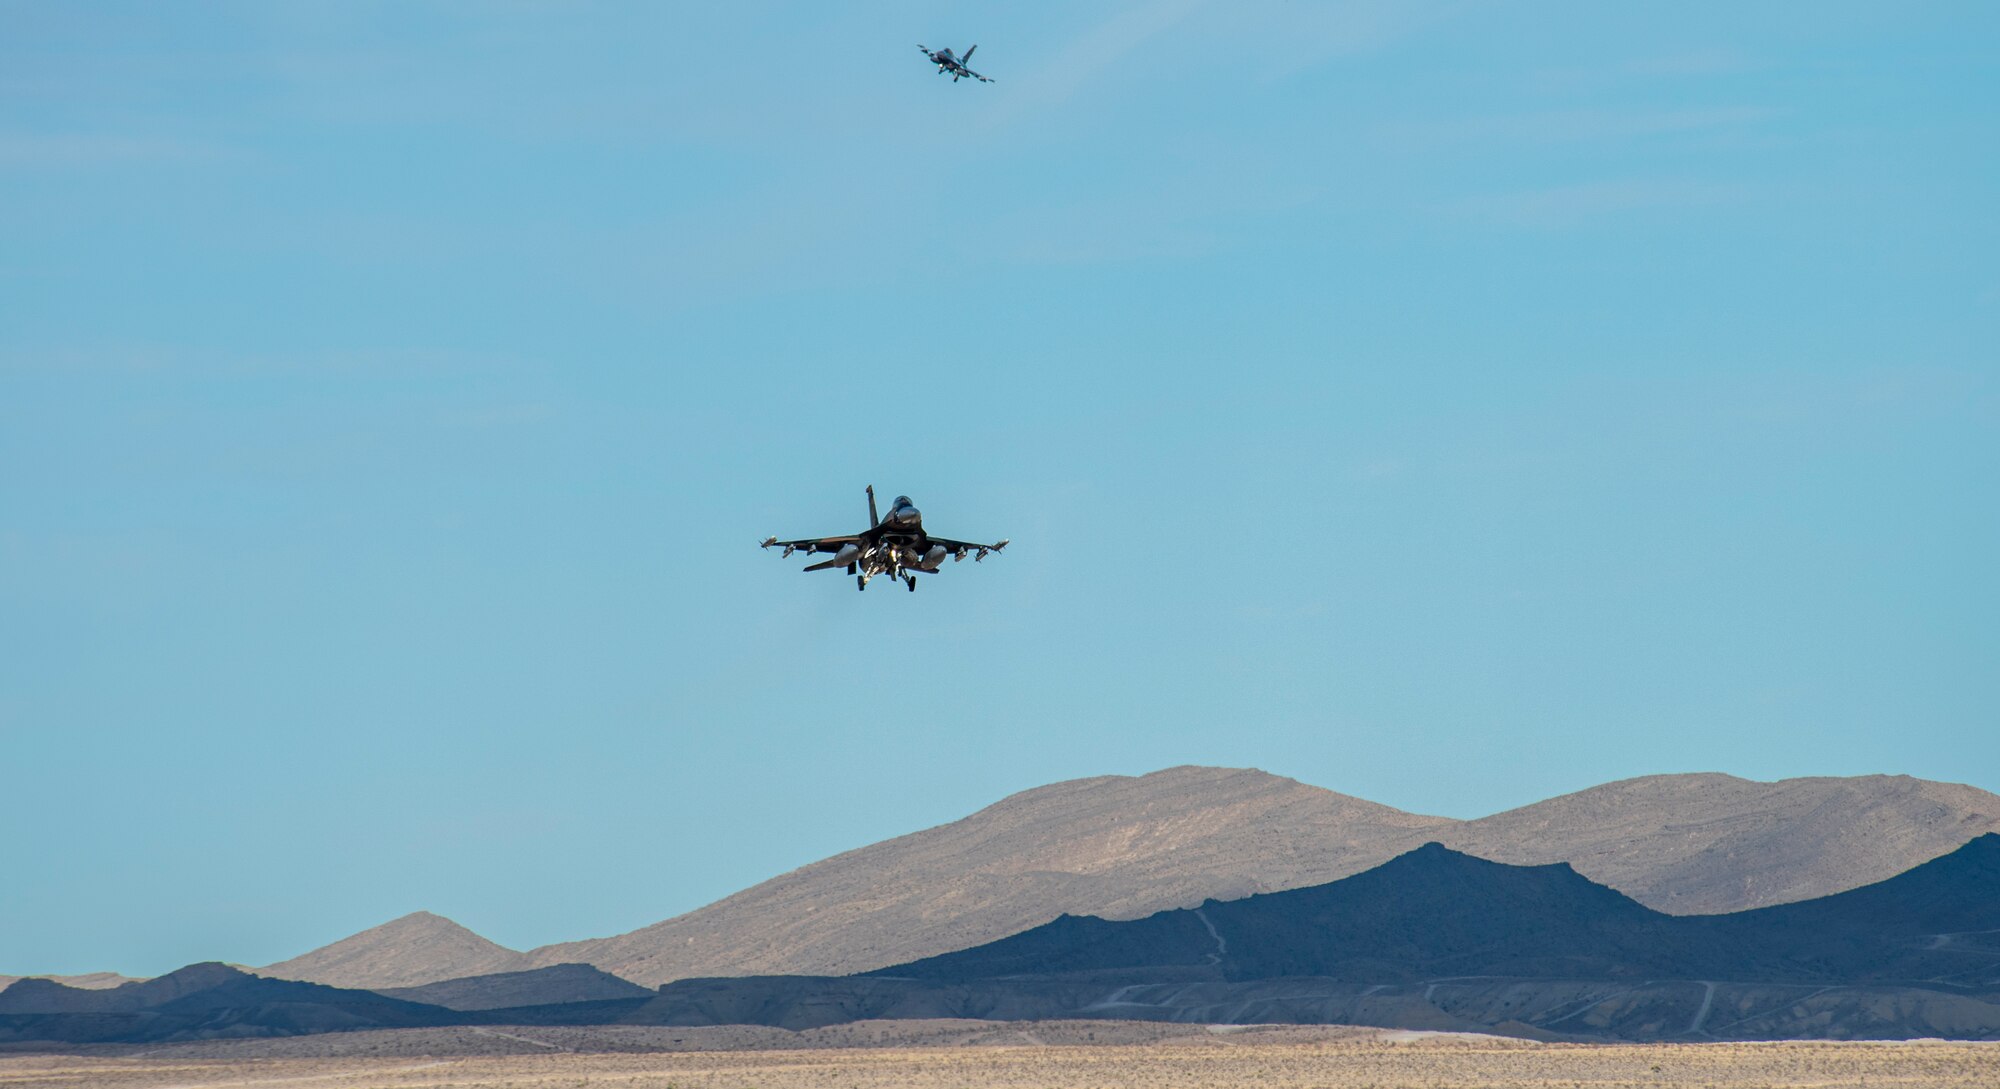 U.S. Air Force F-16 Fighting Falcons from 18th Aggressor Squadron fly over the flight line at Nellis Air Force Base, Nevada, Nov. 6, 2019. The Aggressor’s mission is to know, teach, and replicate a threat in order for other pilots to be able to overcome their adversaries. (U.S. Air Force photo by Nellis Air Force Base Public Affairs)